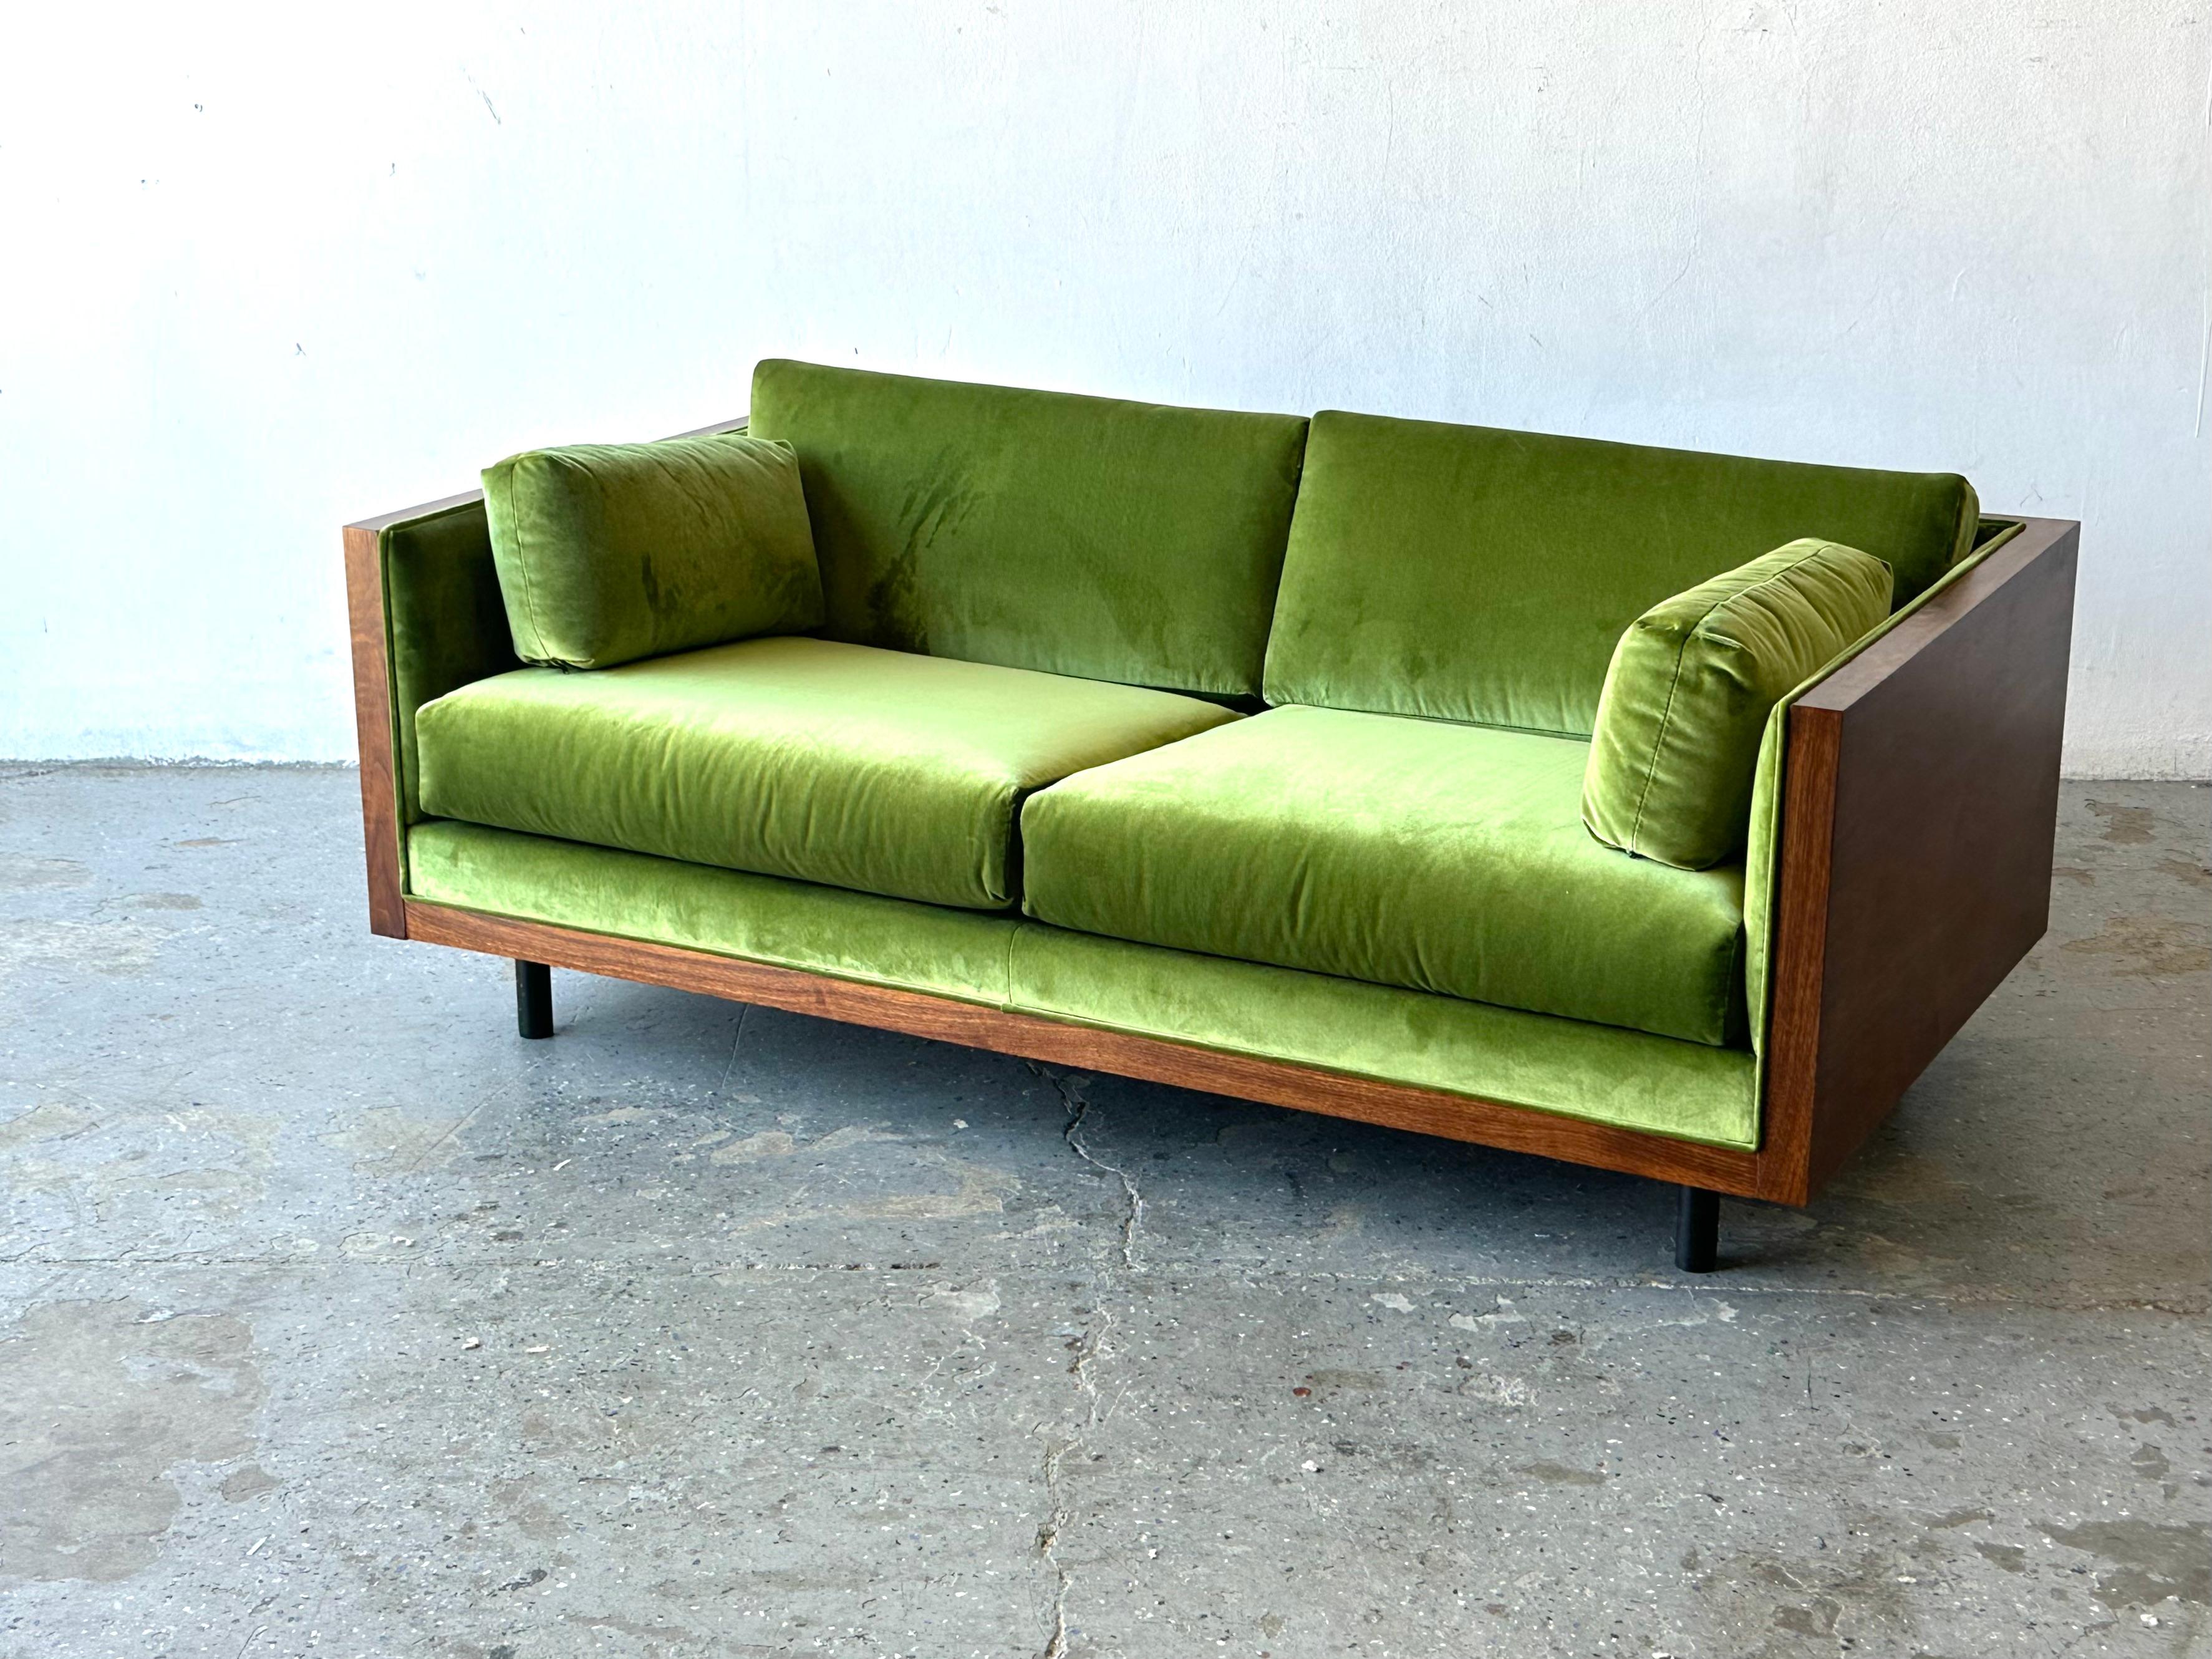 MCM Milo Baughman style walnut Green Velvet Case Loveseat Sofa
A gorgeous Mid-Century Modern walnut case reupholstered in very soft, lush green velvet. Loveseat is in the style of Milo Baughman. Professionally refinished. Newly